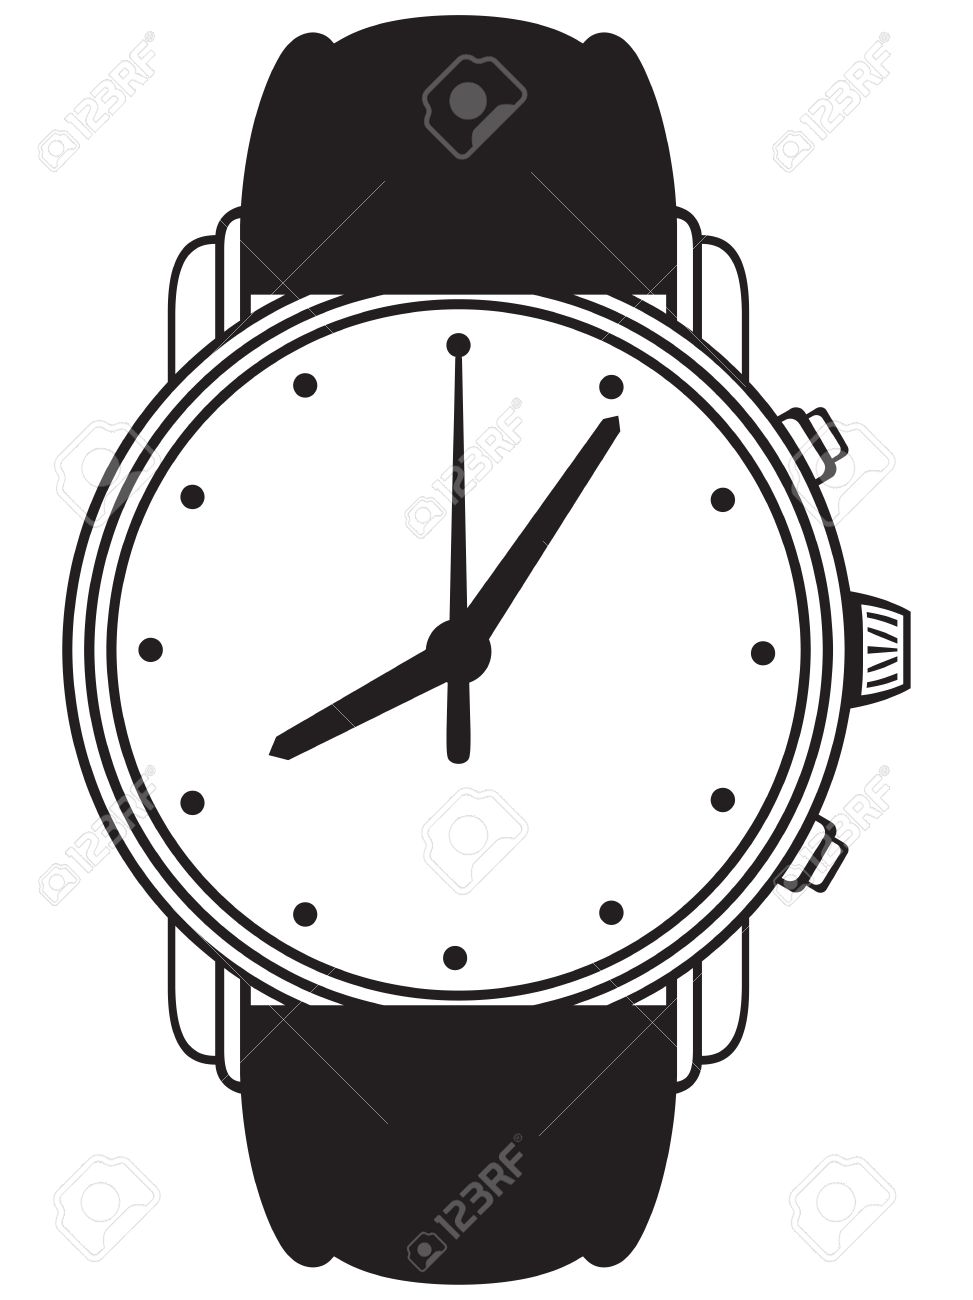 Wrist Watch Clipart Black And White.